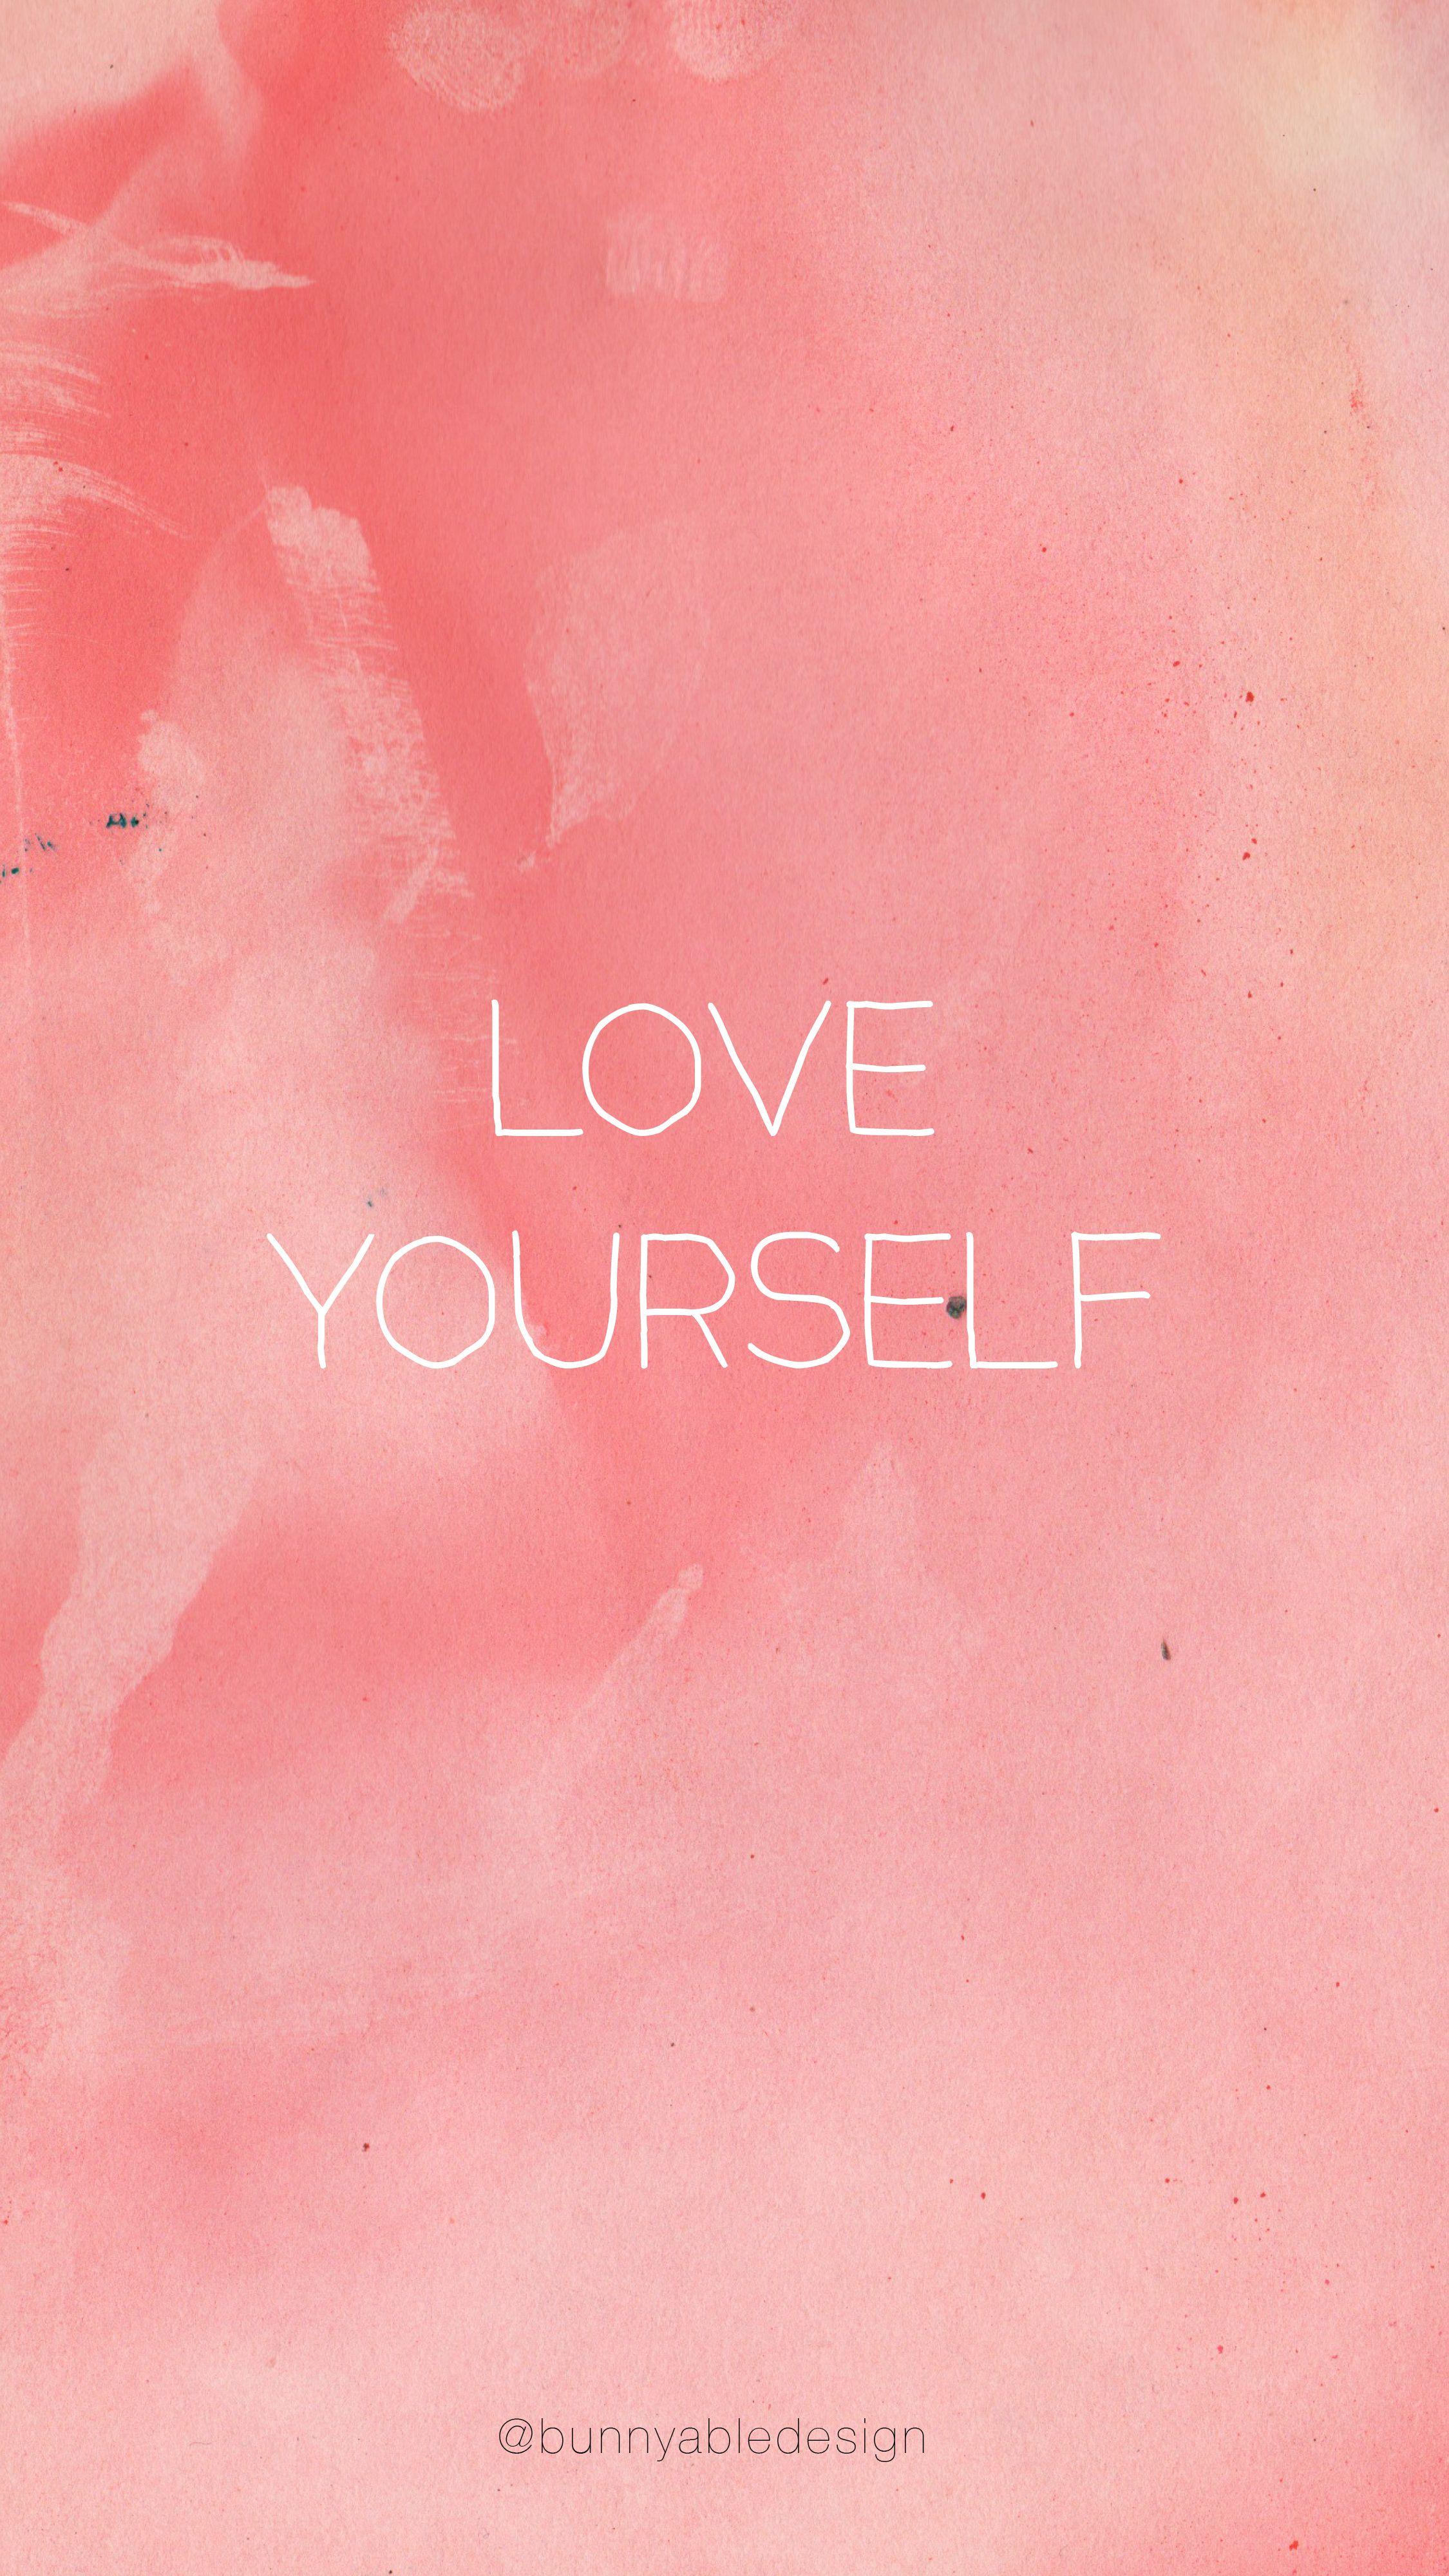 Love yourself ❤ #wallpaper #iphone. Wallpaper for iPhone